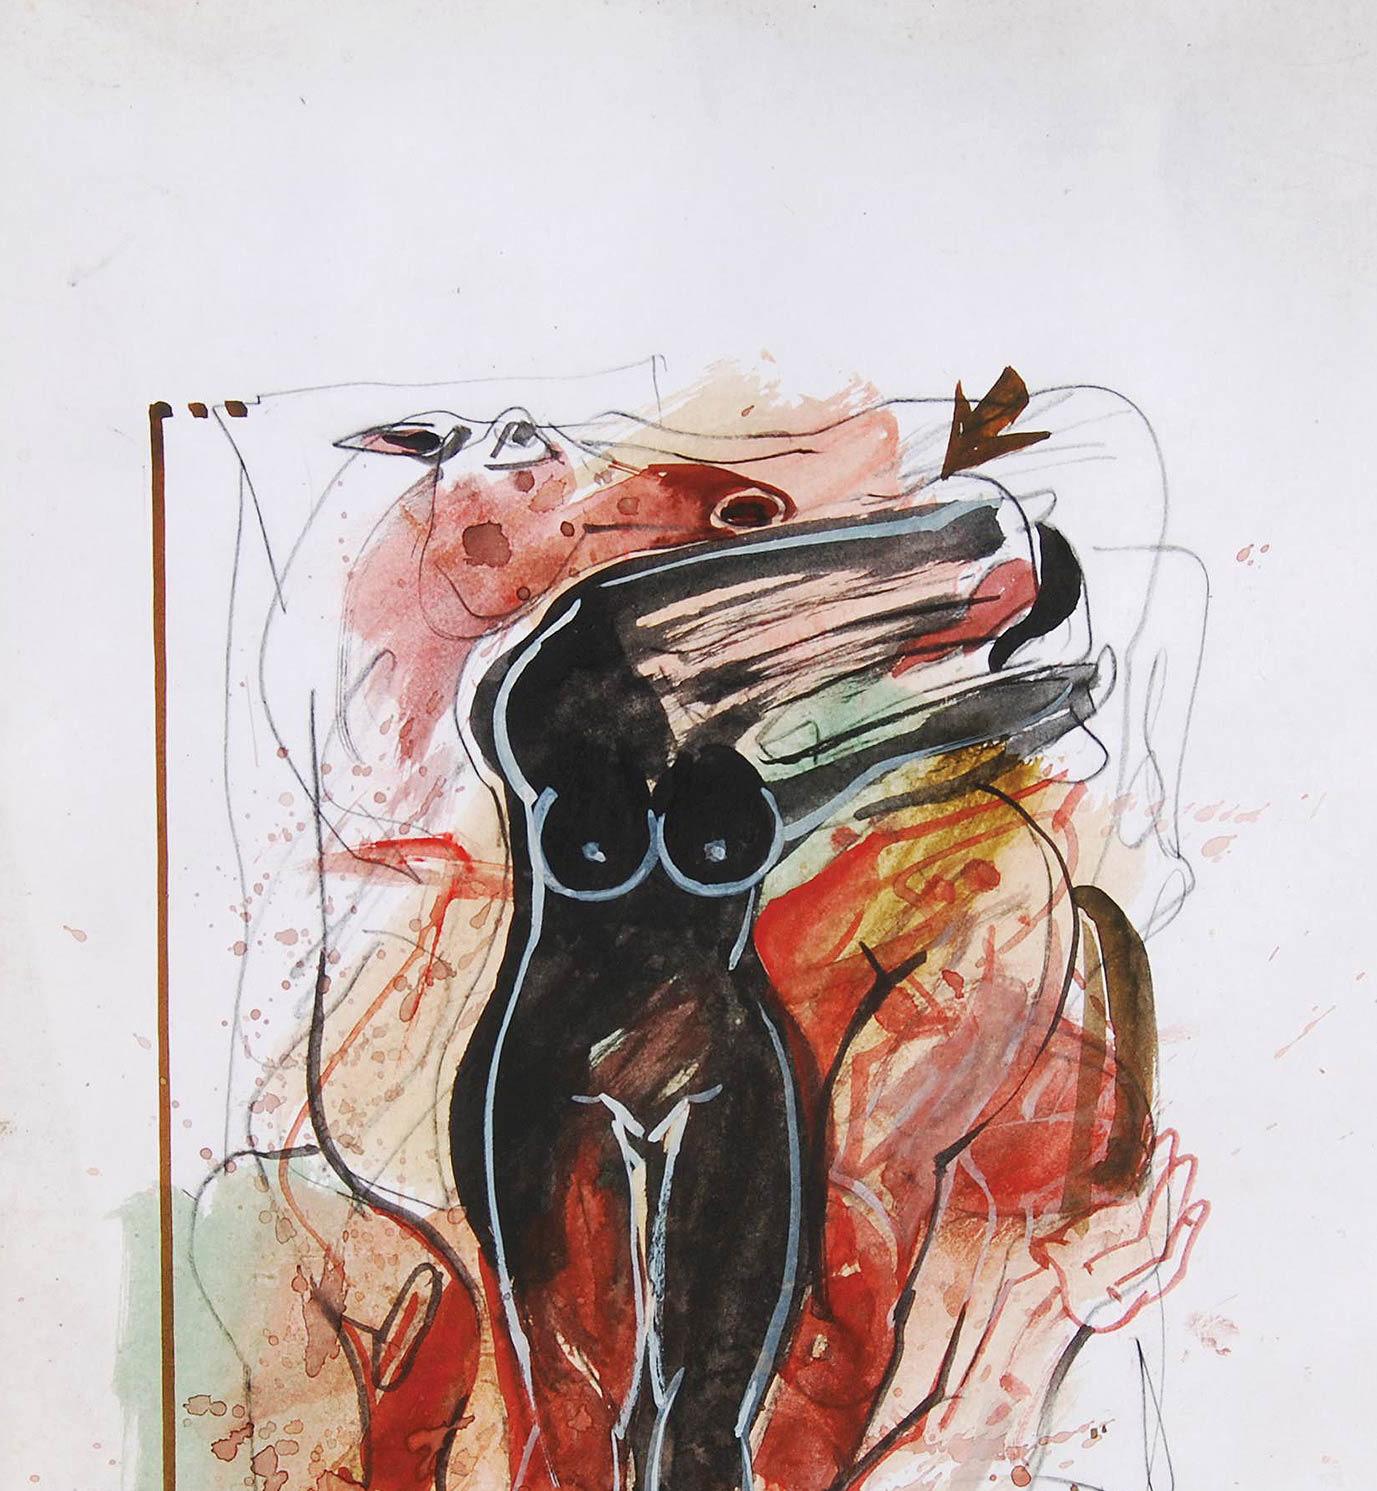 Woman & Horse, Nude, Mixed Media on Paper, Red, Black, Brown 